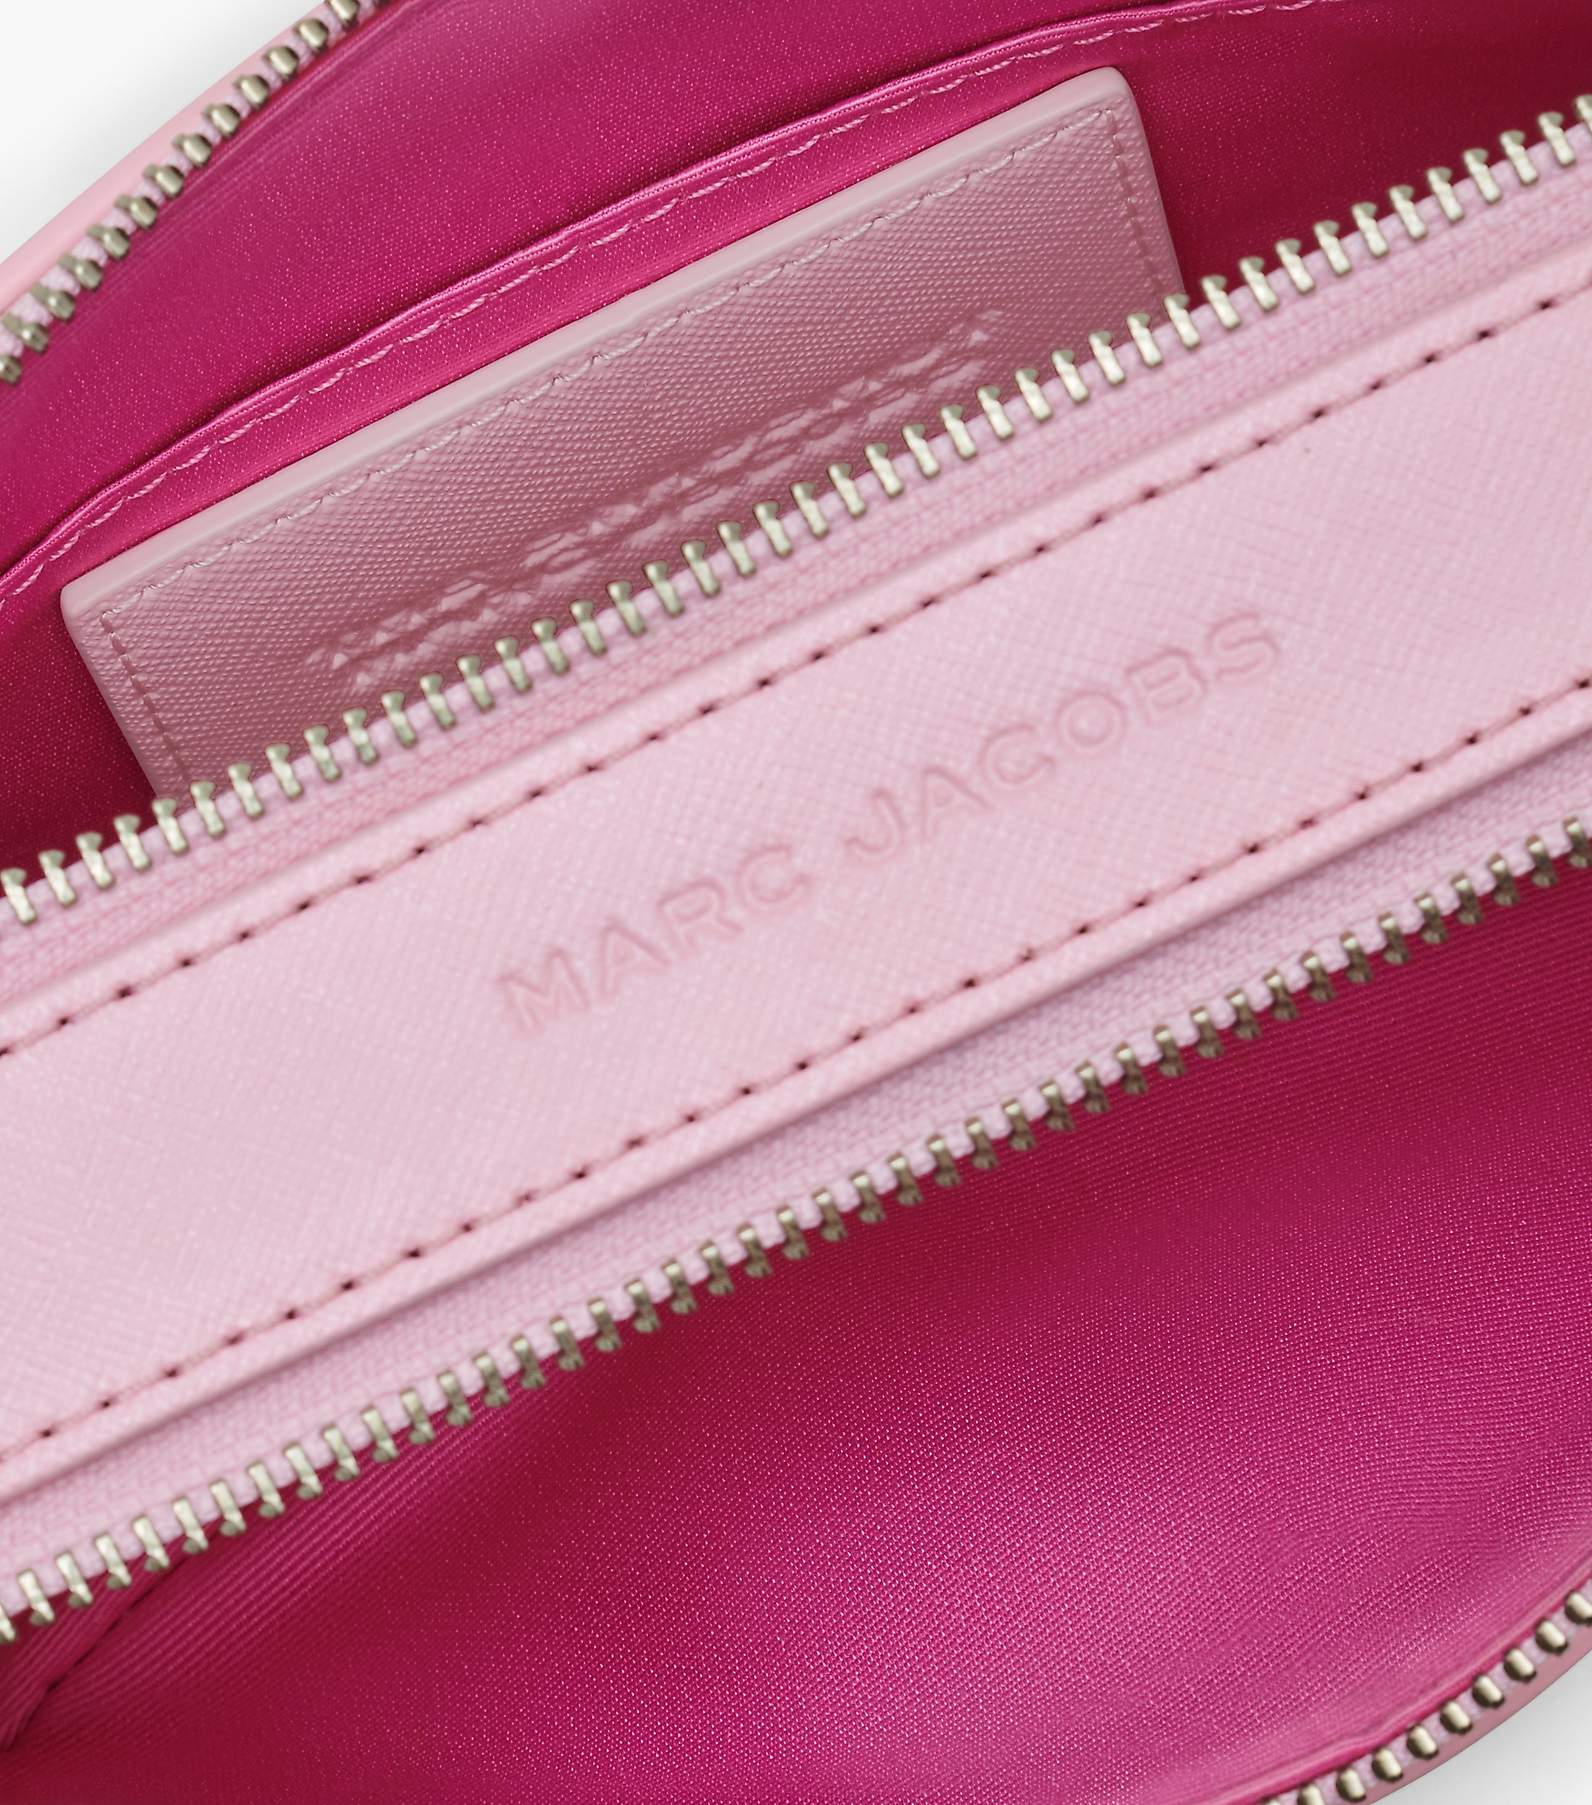 Snapshot of Marc Jacobs - Grey and pink leather bag with zippers